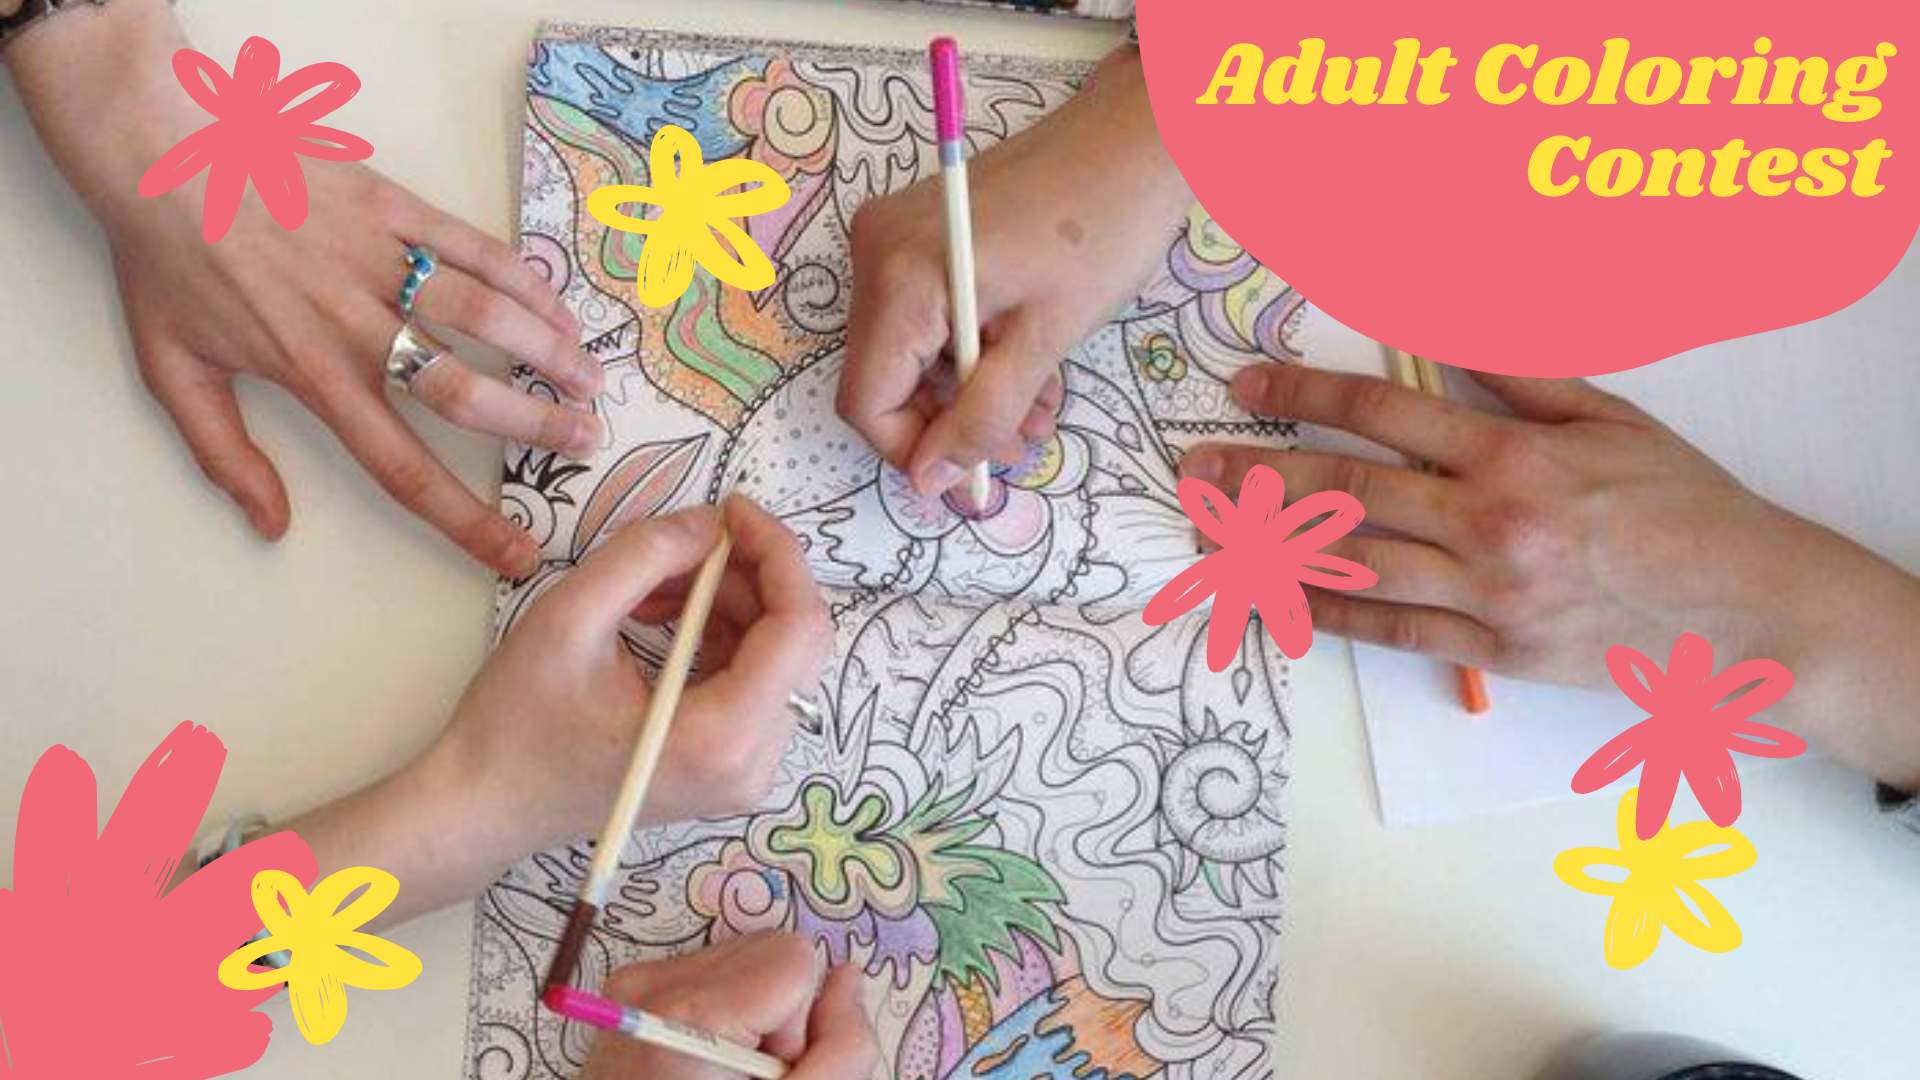 Five hands coloring a picture, using colored pencils